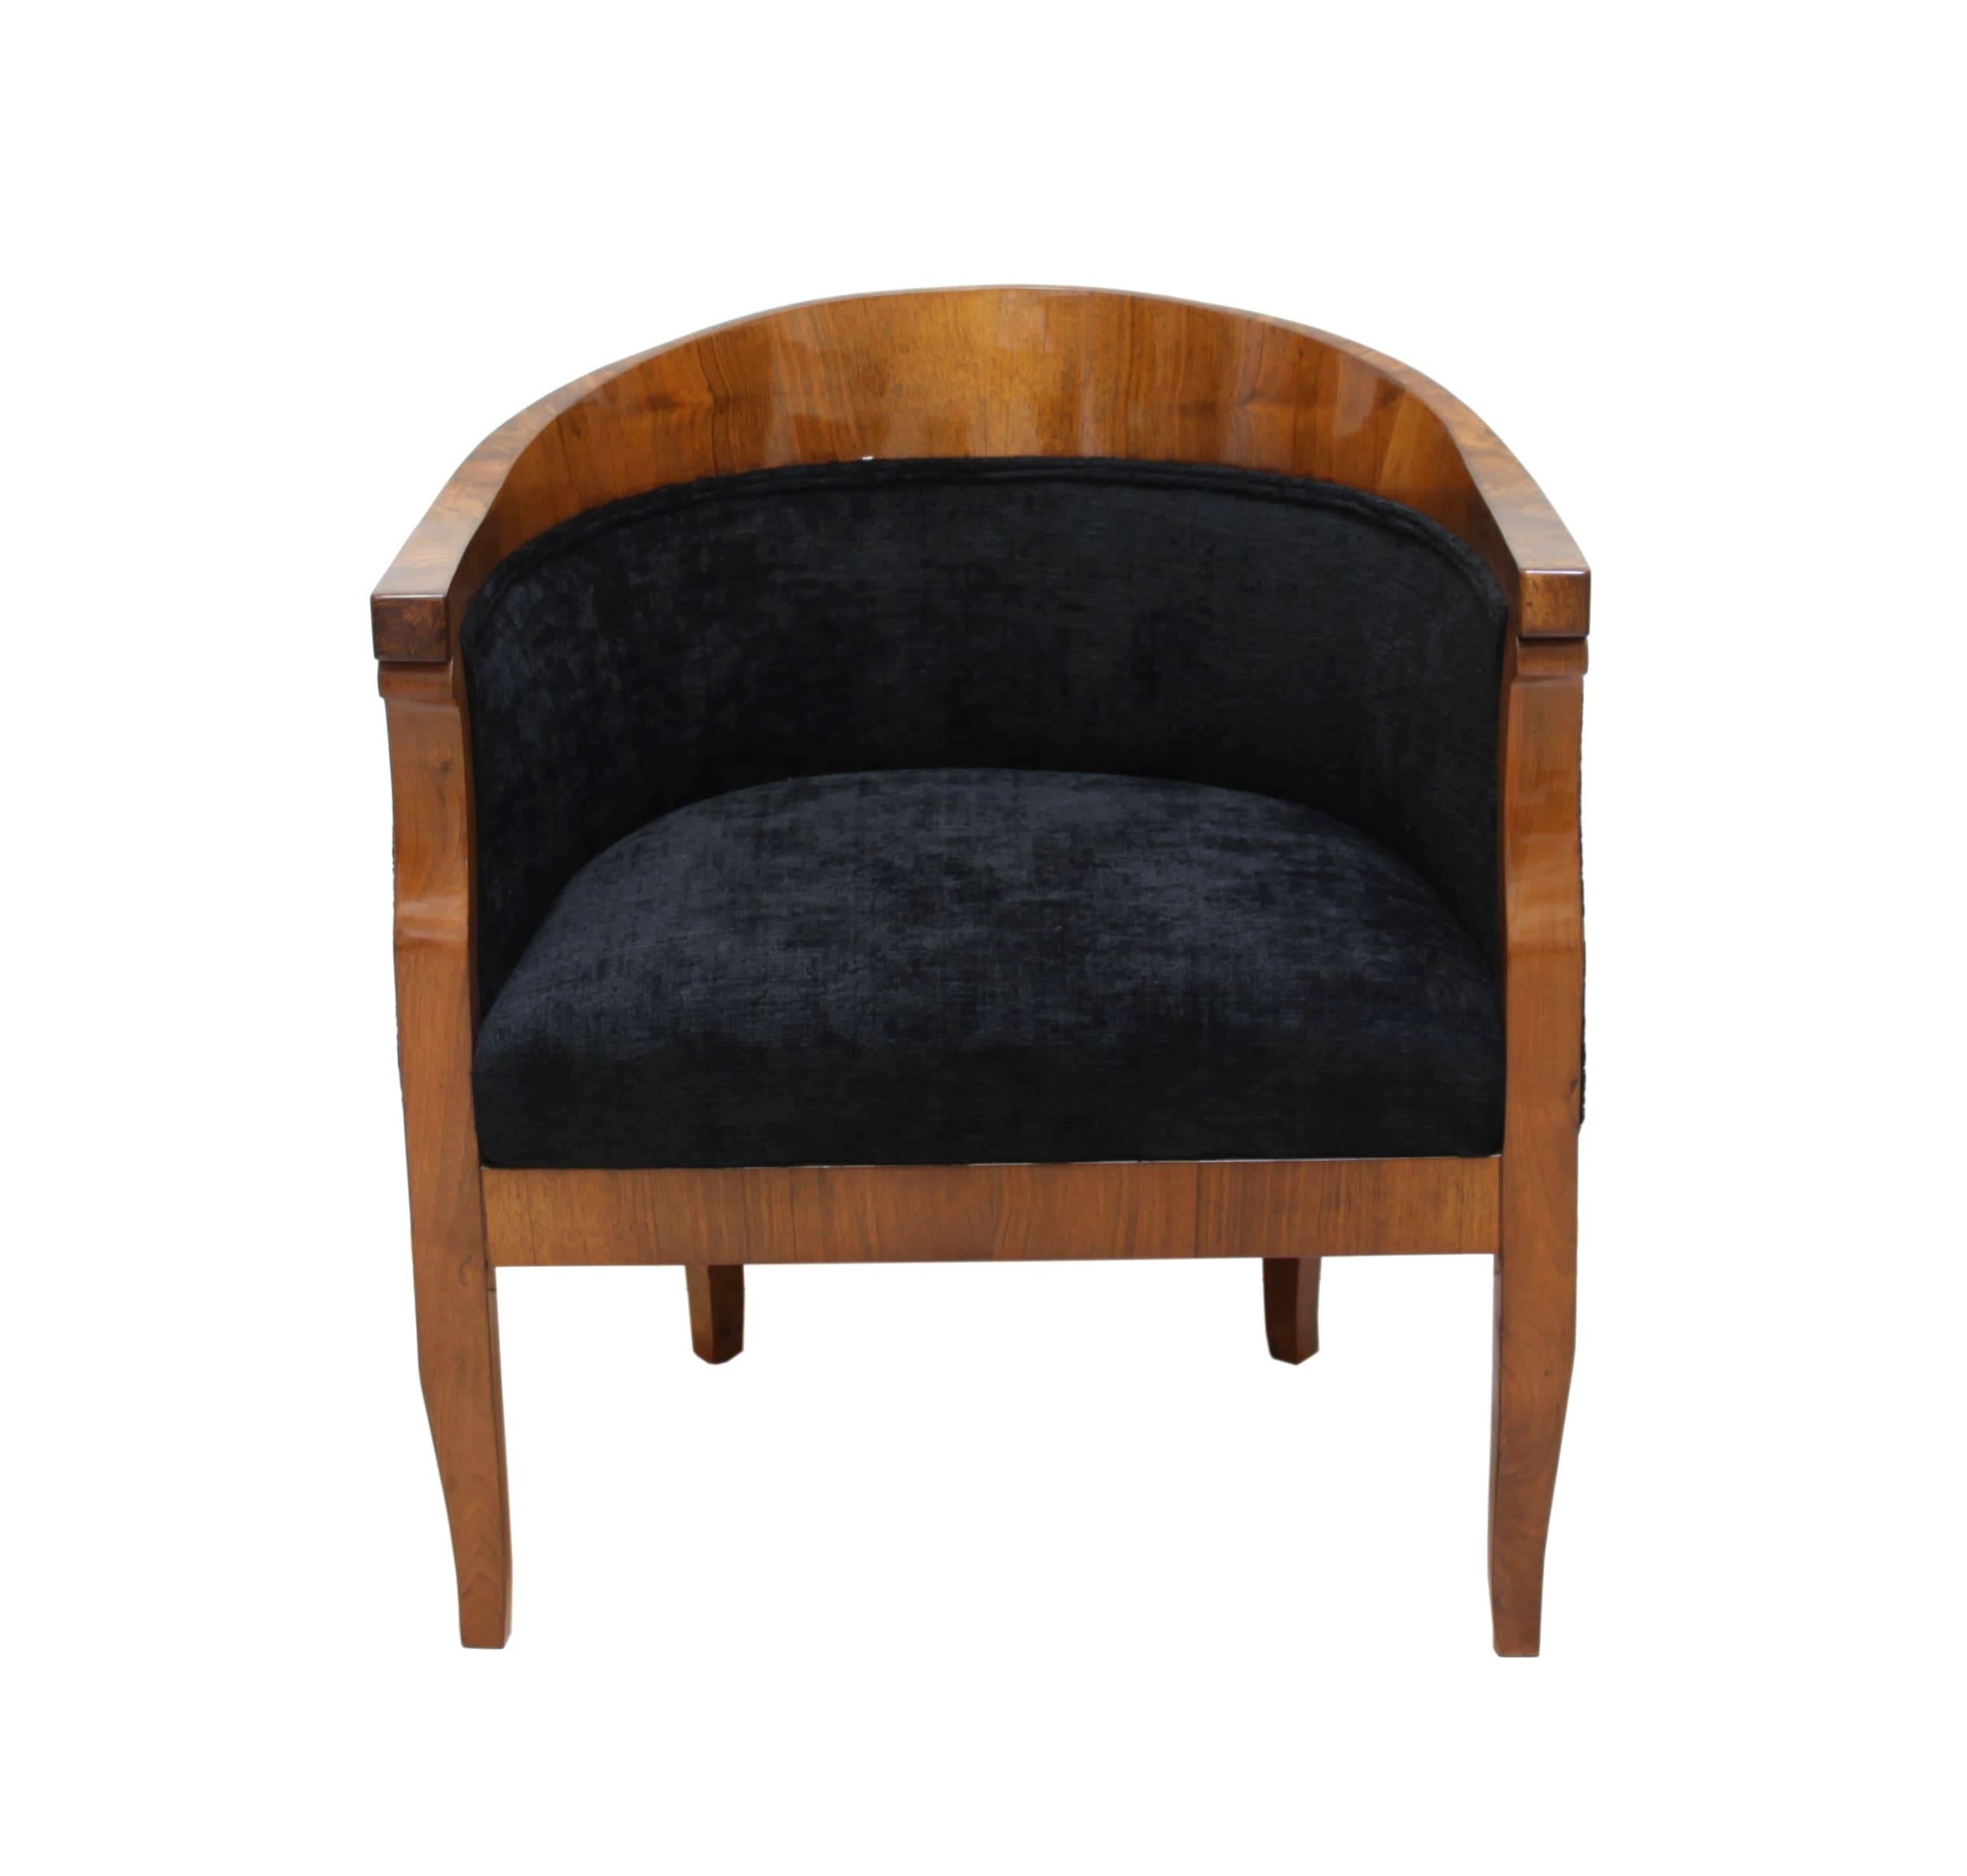 Elegant original Biedermeier Bergere Chair from Vienna around 1825.

Very classicist design and great workmanship with thick old veneer.
Walnut veneered with lovely grain and solid wood, french polished with shellac.
New upholstery with a very fine